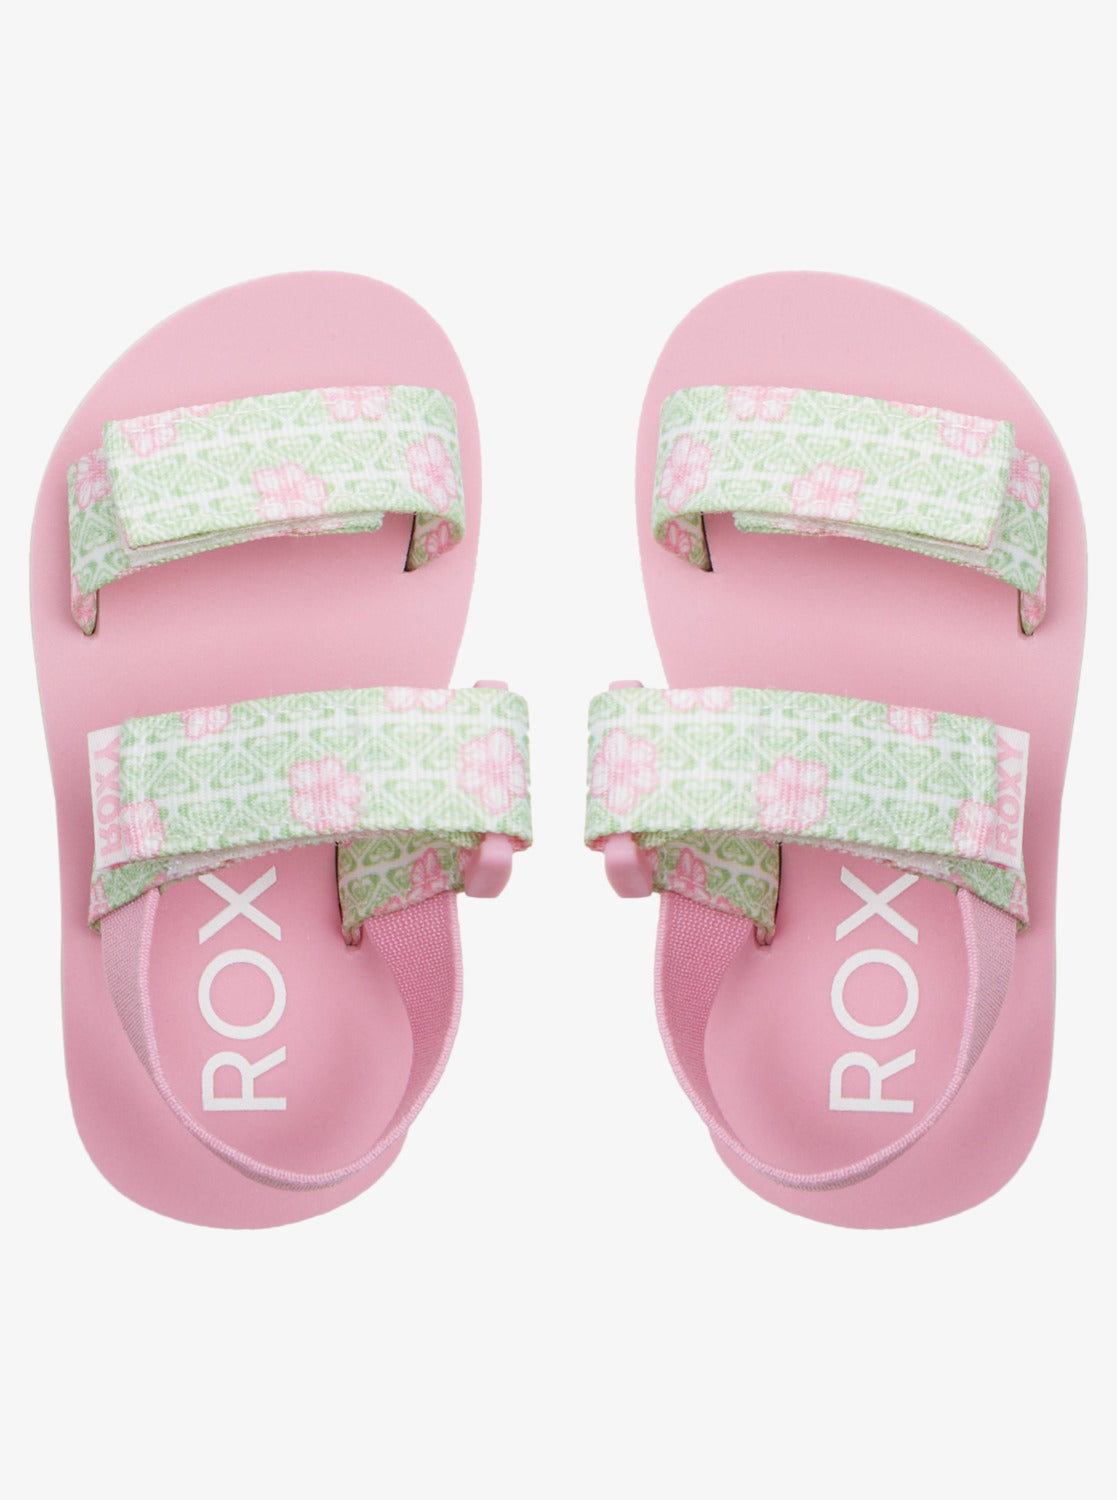 Roxy Cage Girls Sandals in Green/Pink